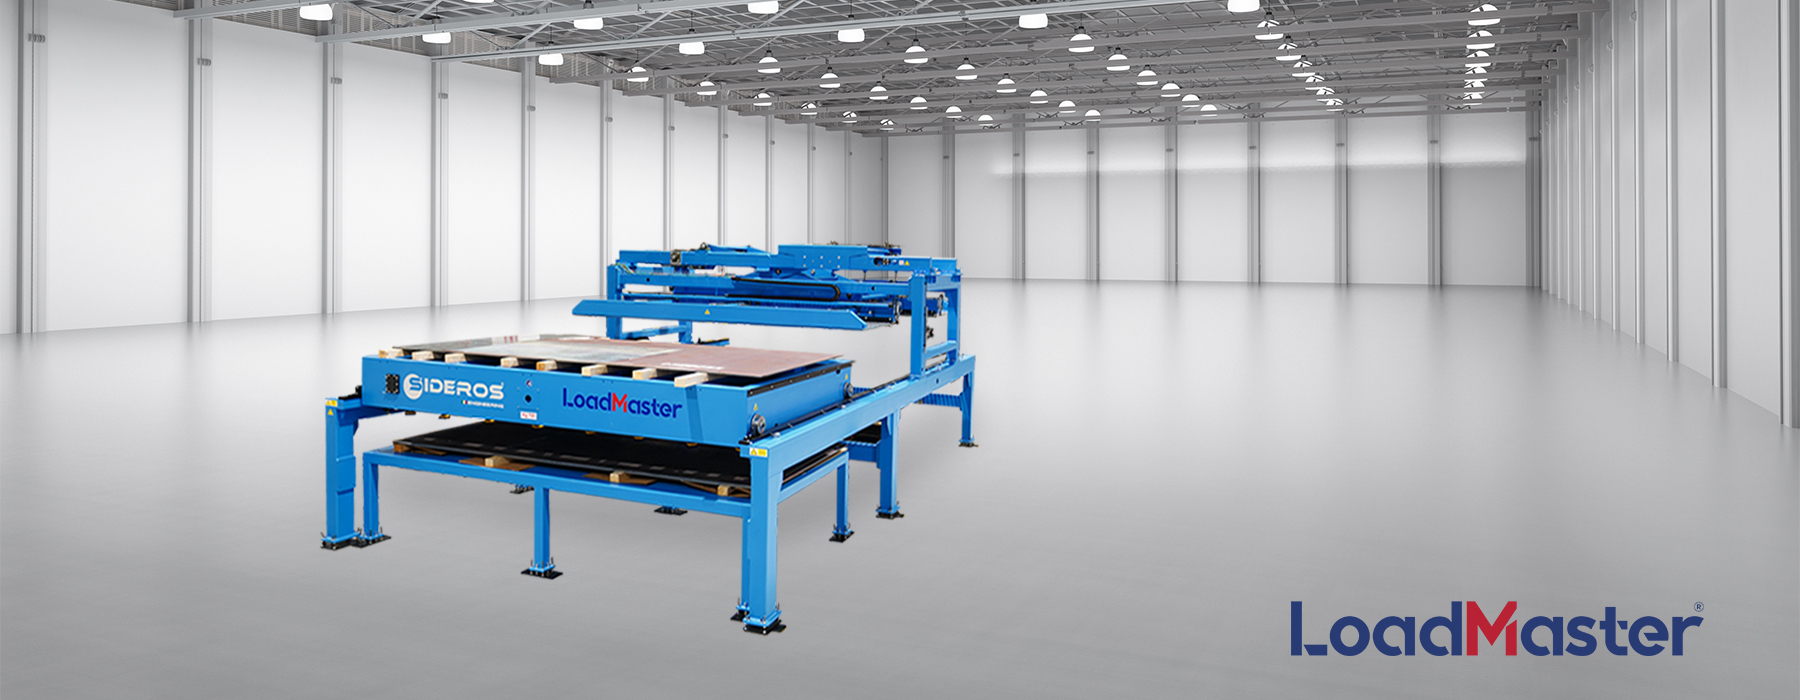 min loadmaster | Automated Load and Unload System for Tubes and Bars